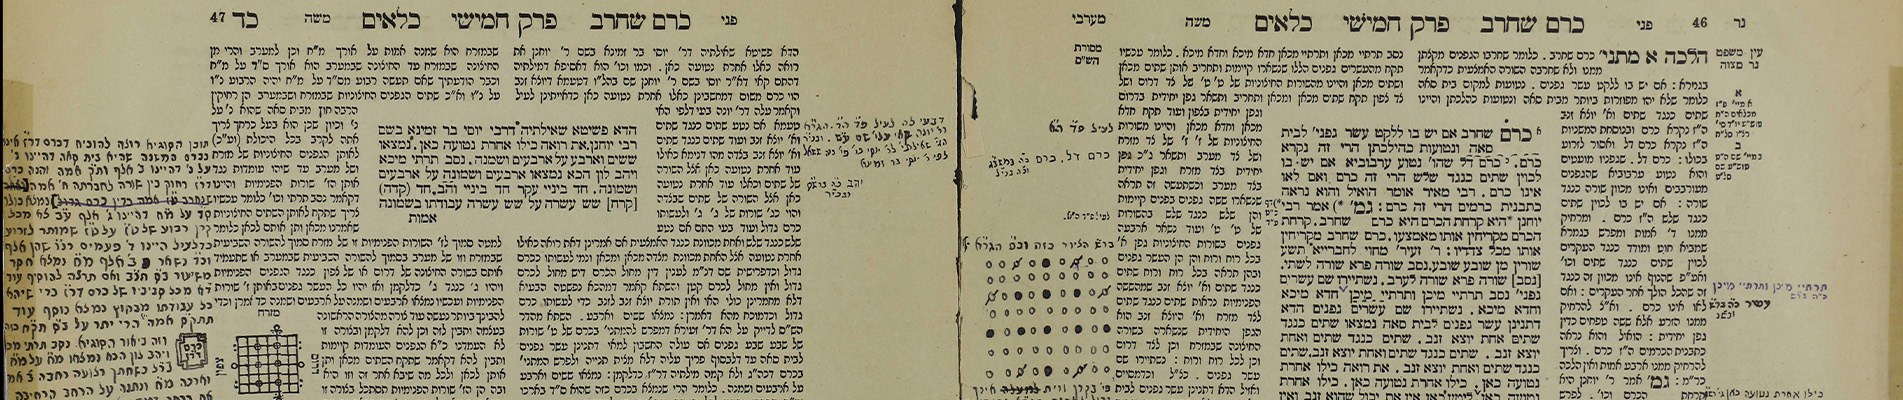 Jerusalem Talmud With Kanievsky Handwritten Notes Now Online at the National Library of Israel